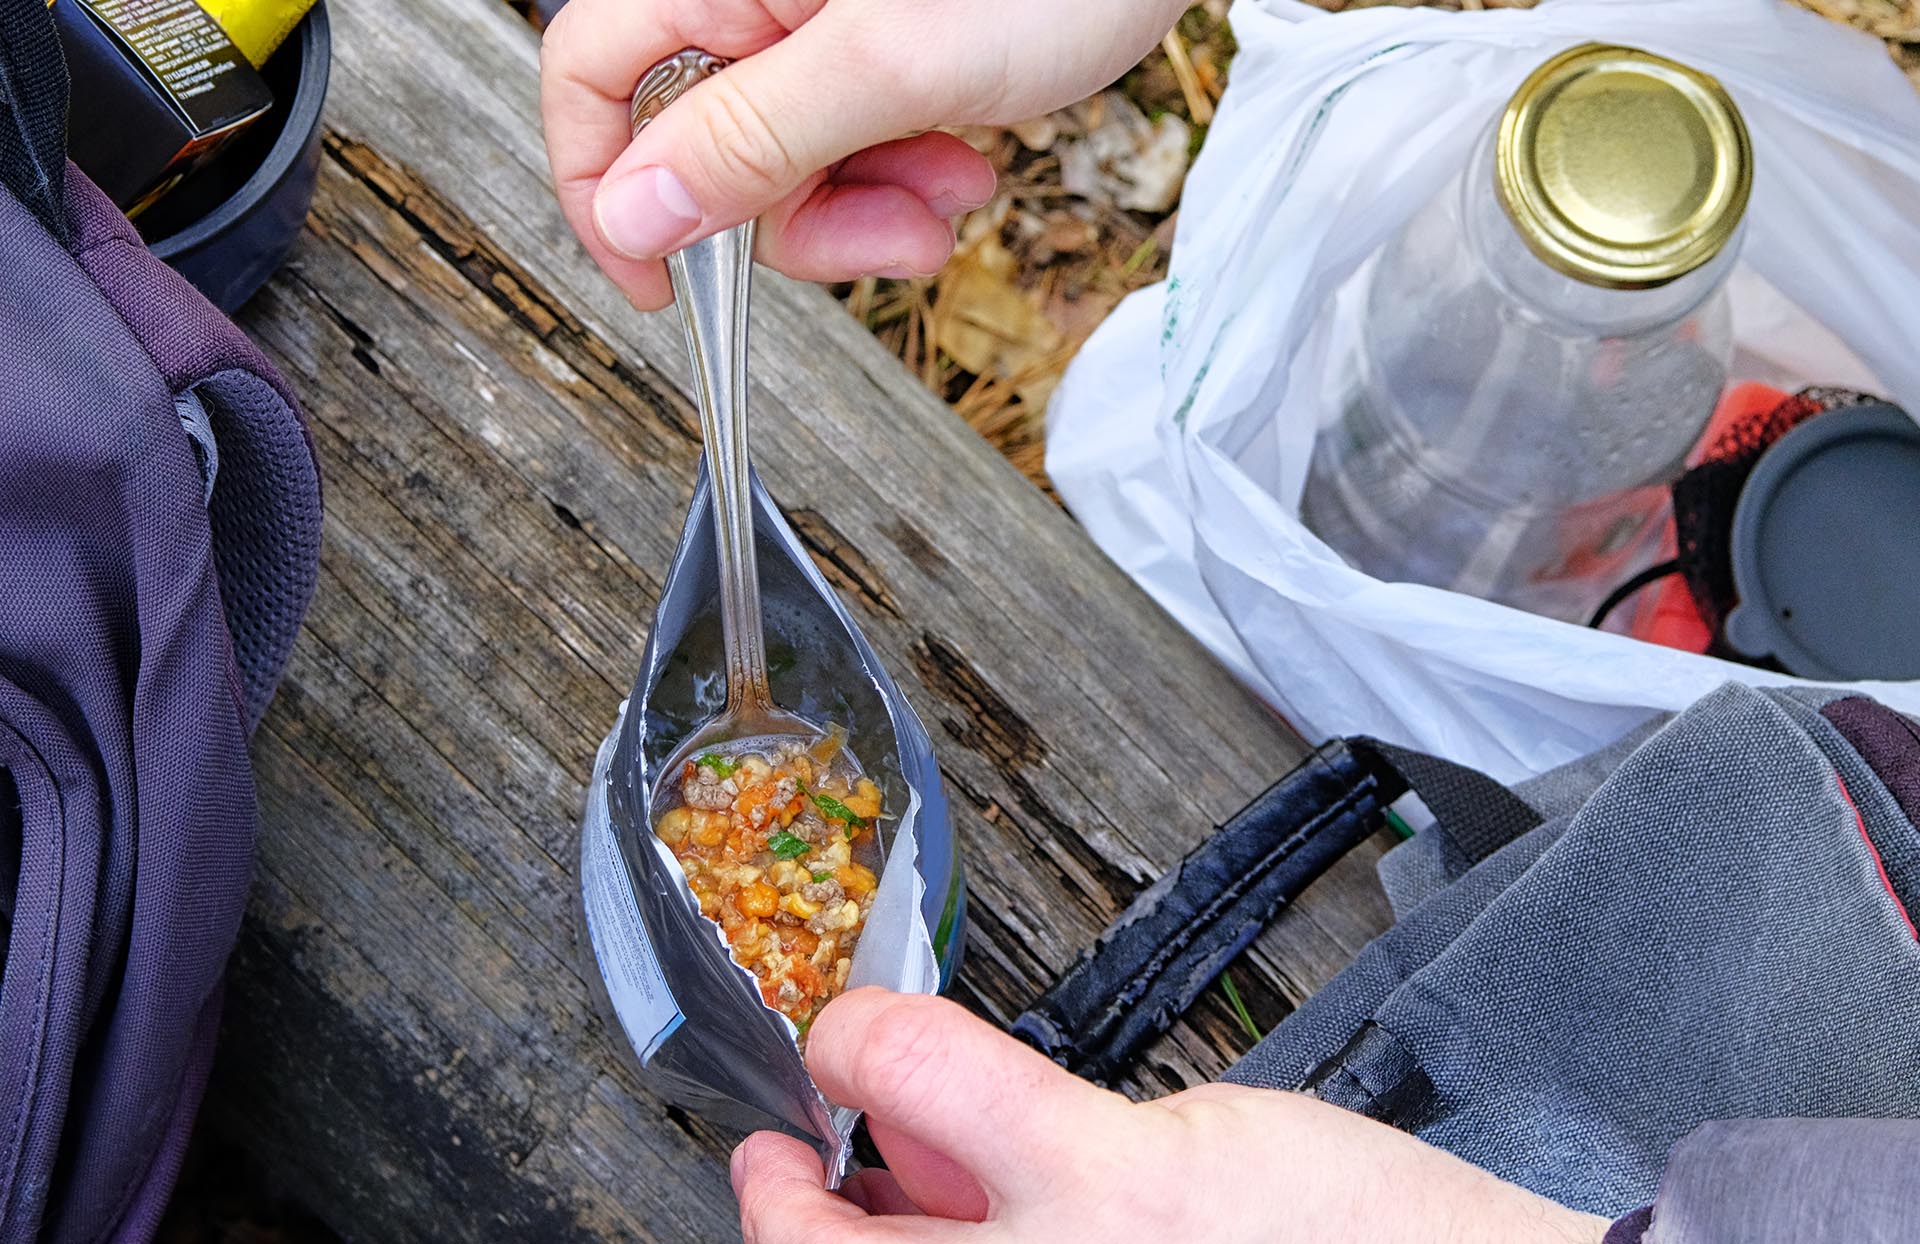 freeze-dried meal in a bag